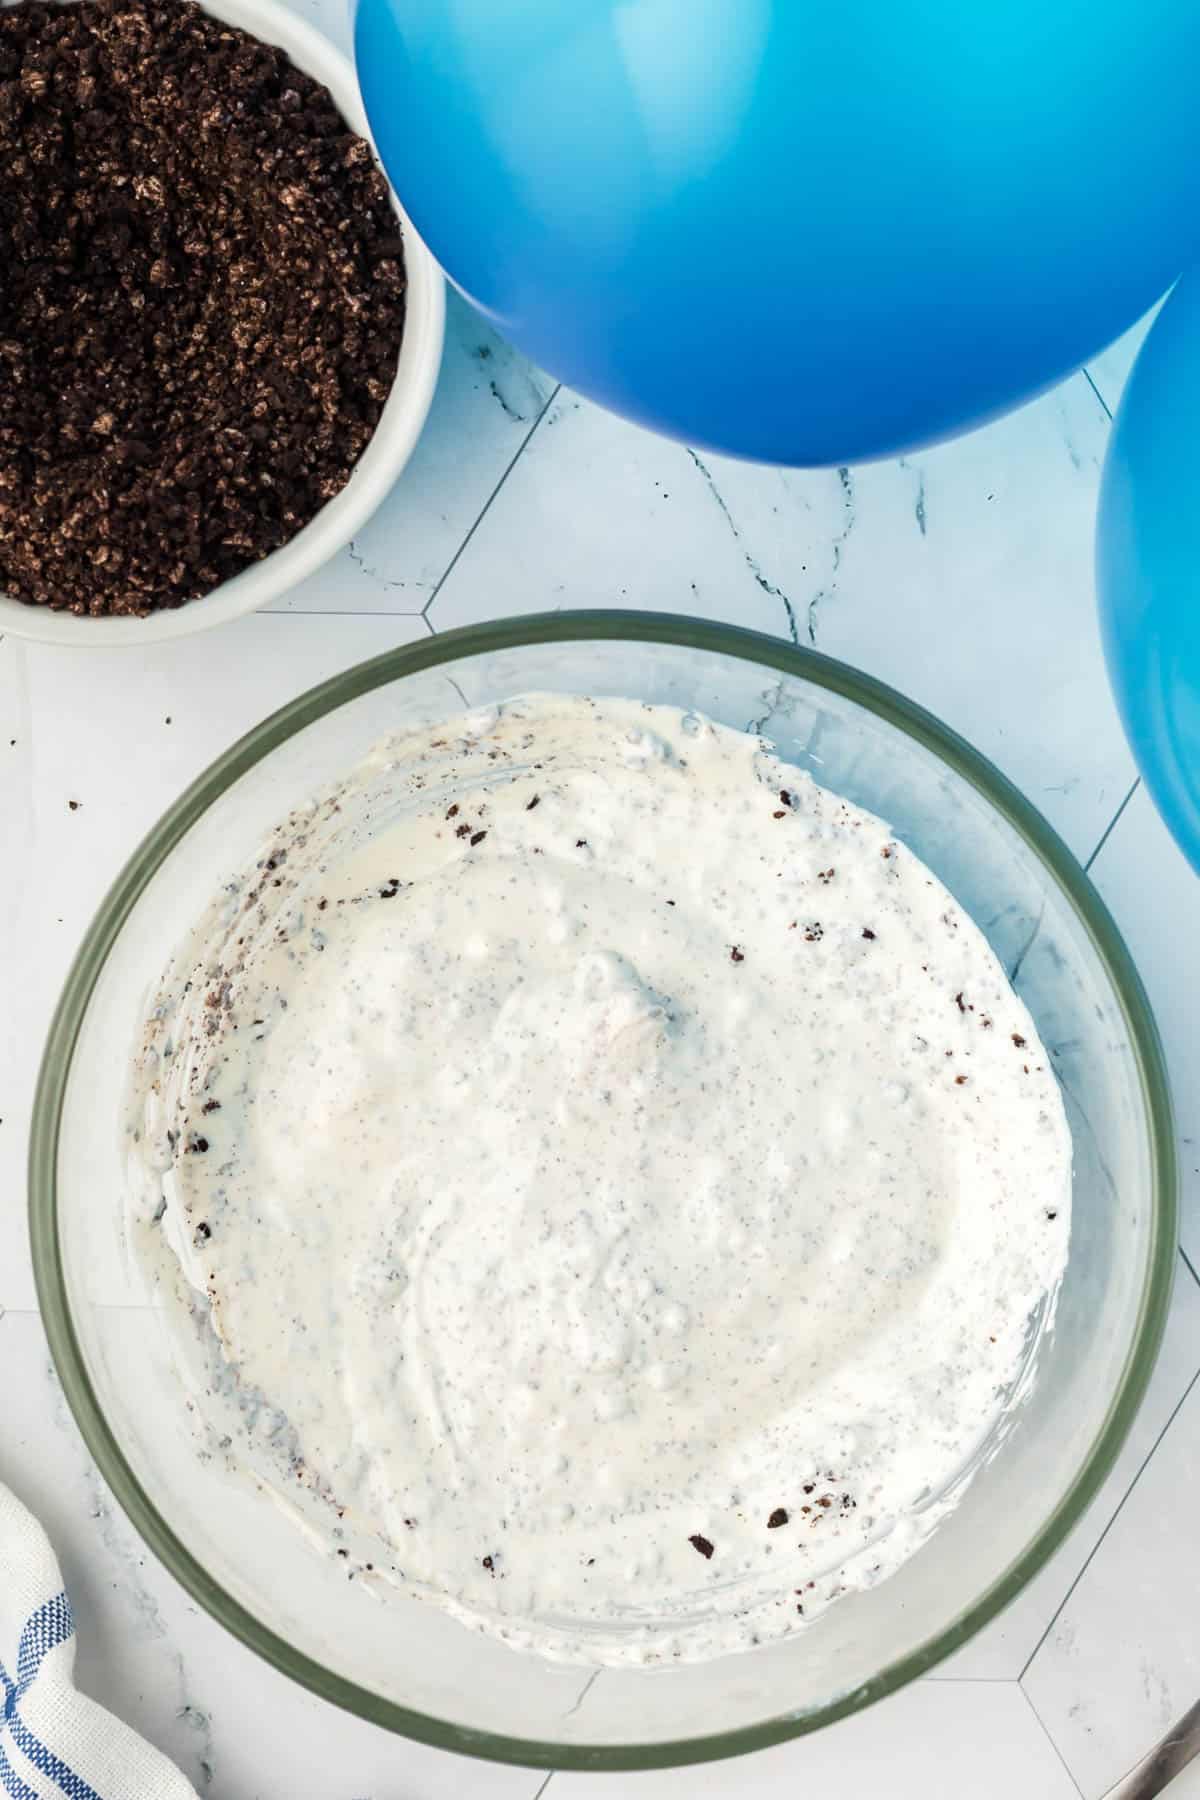 Stirring Oreo crumbs into melted white chocolate for a melted cookies and cream mixture.